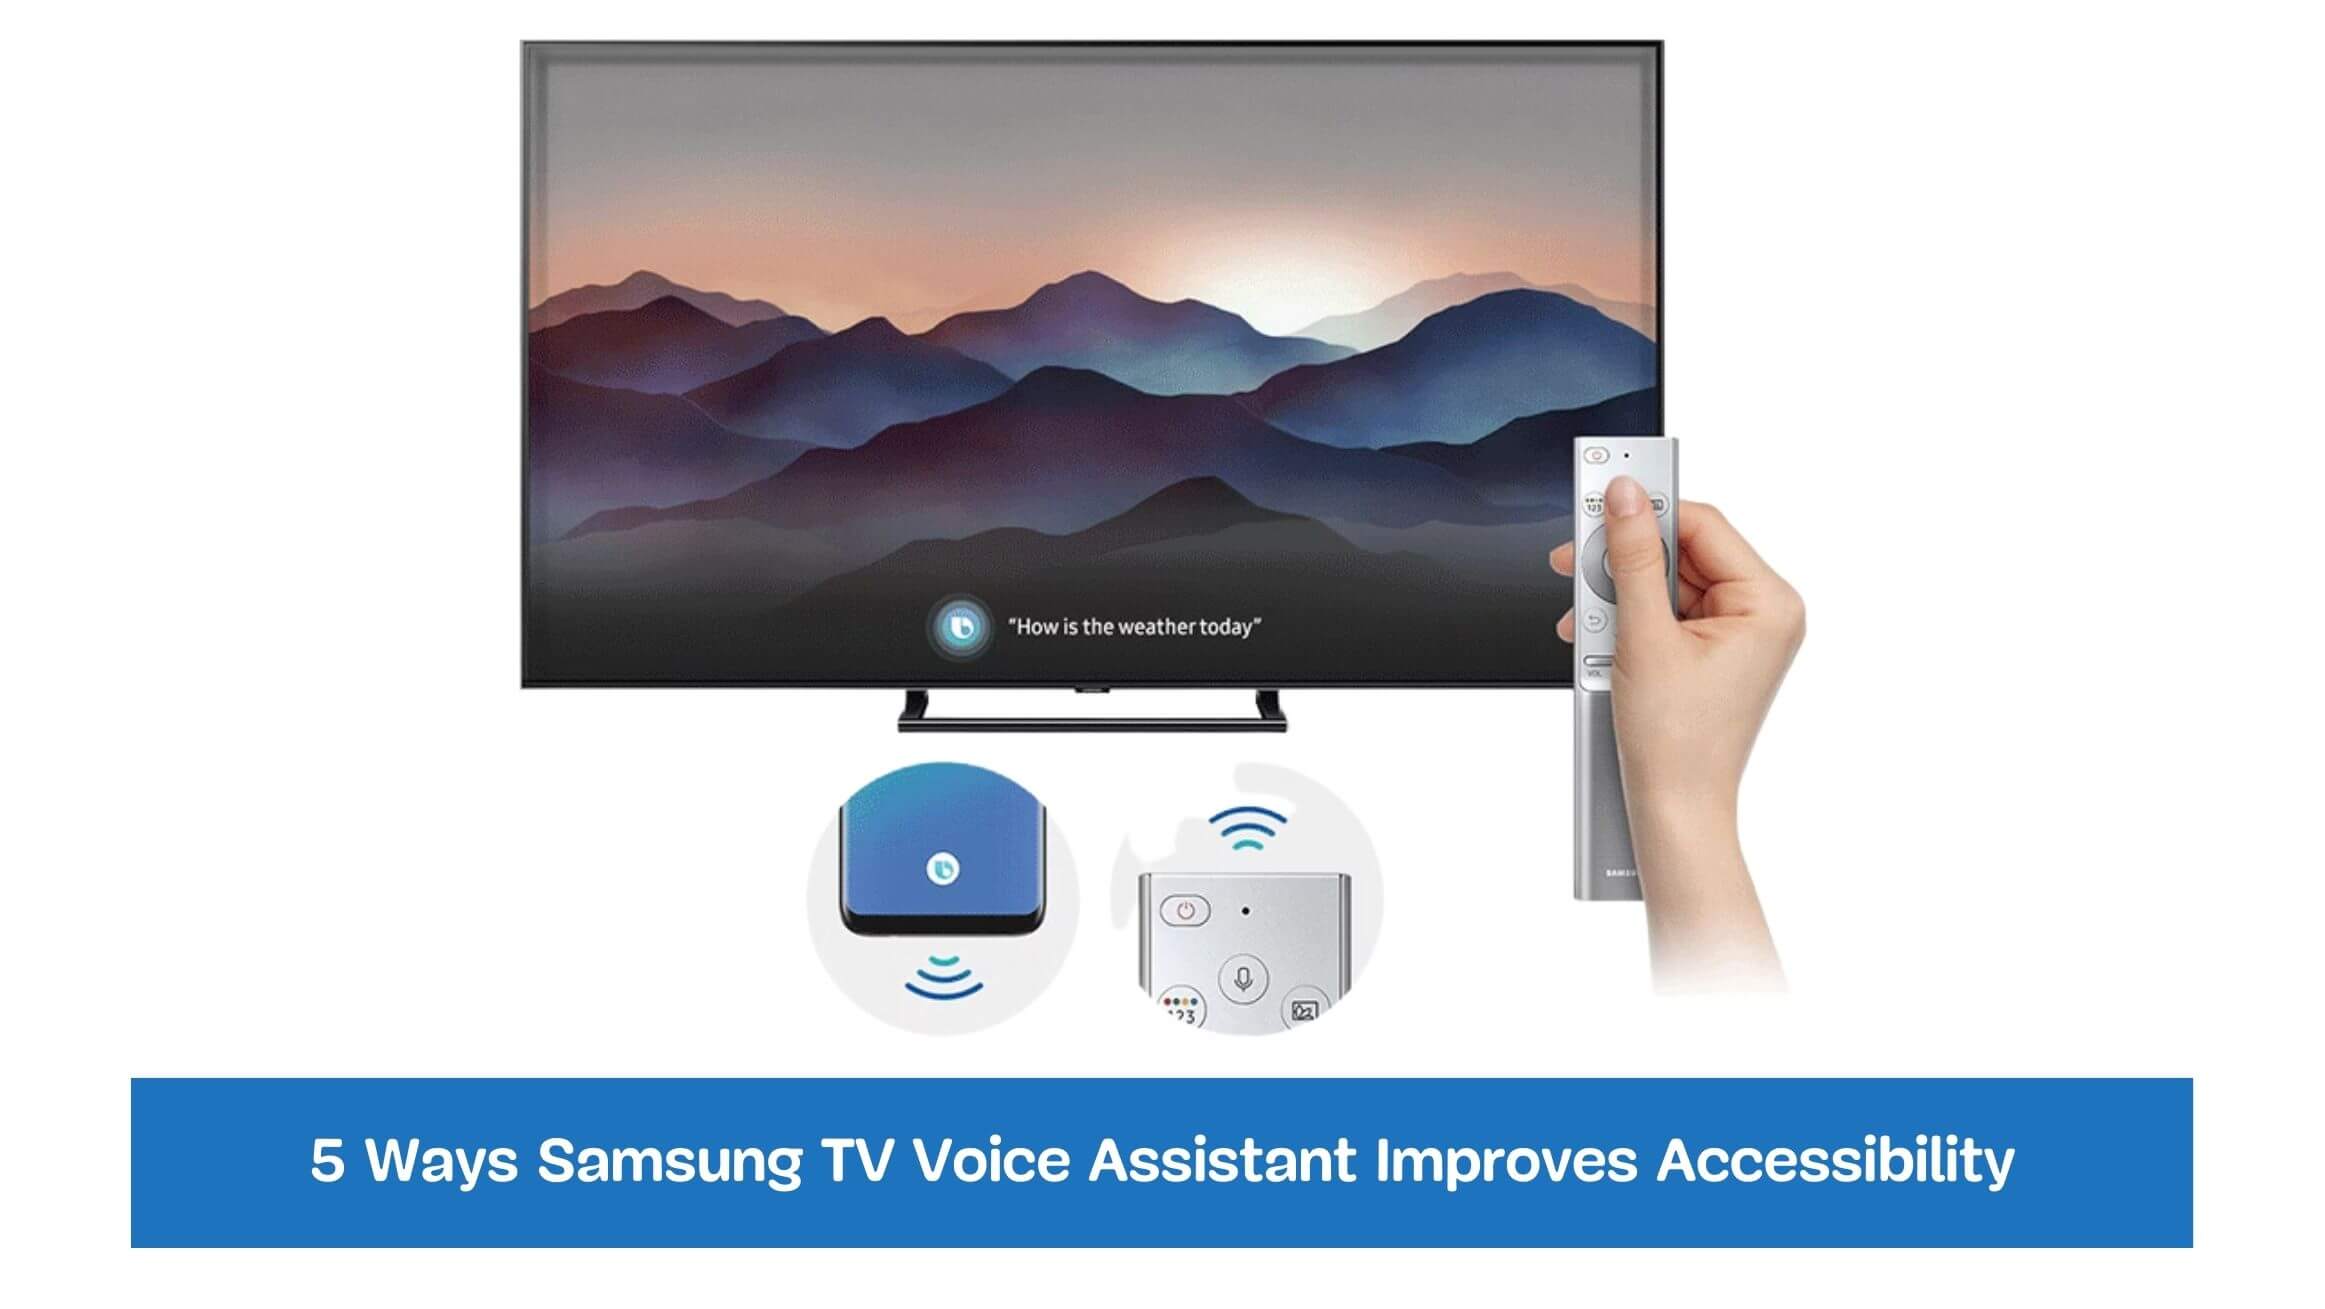 5 Ways Samsung TV Voice Assistant Improves Accessibility